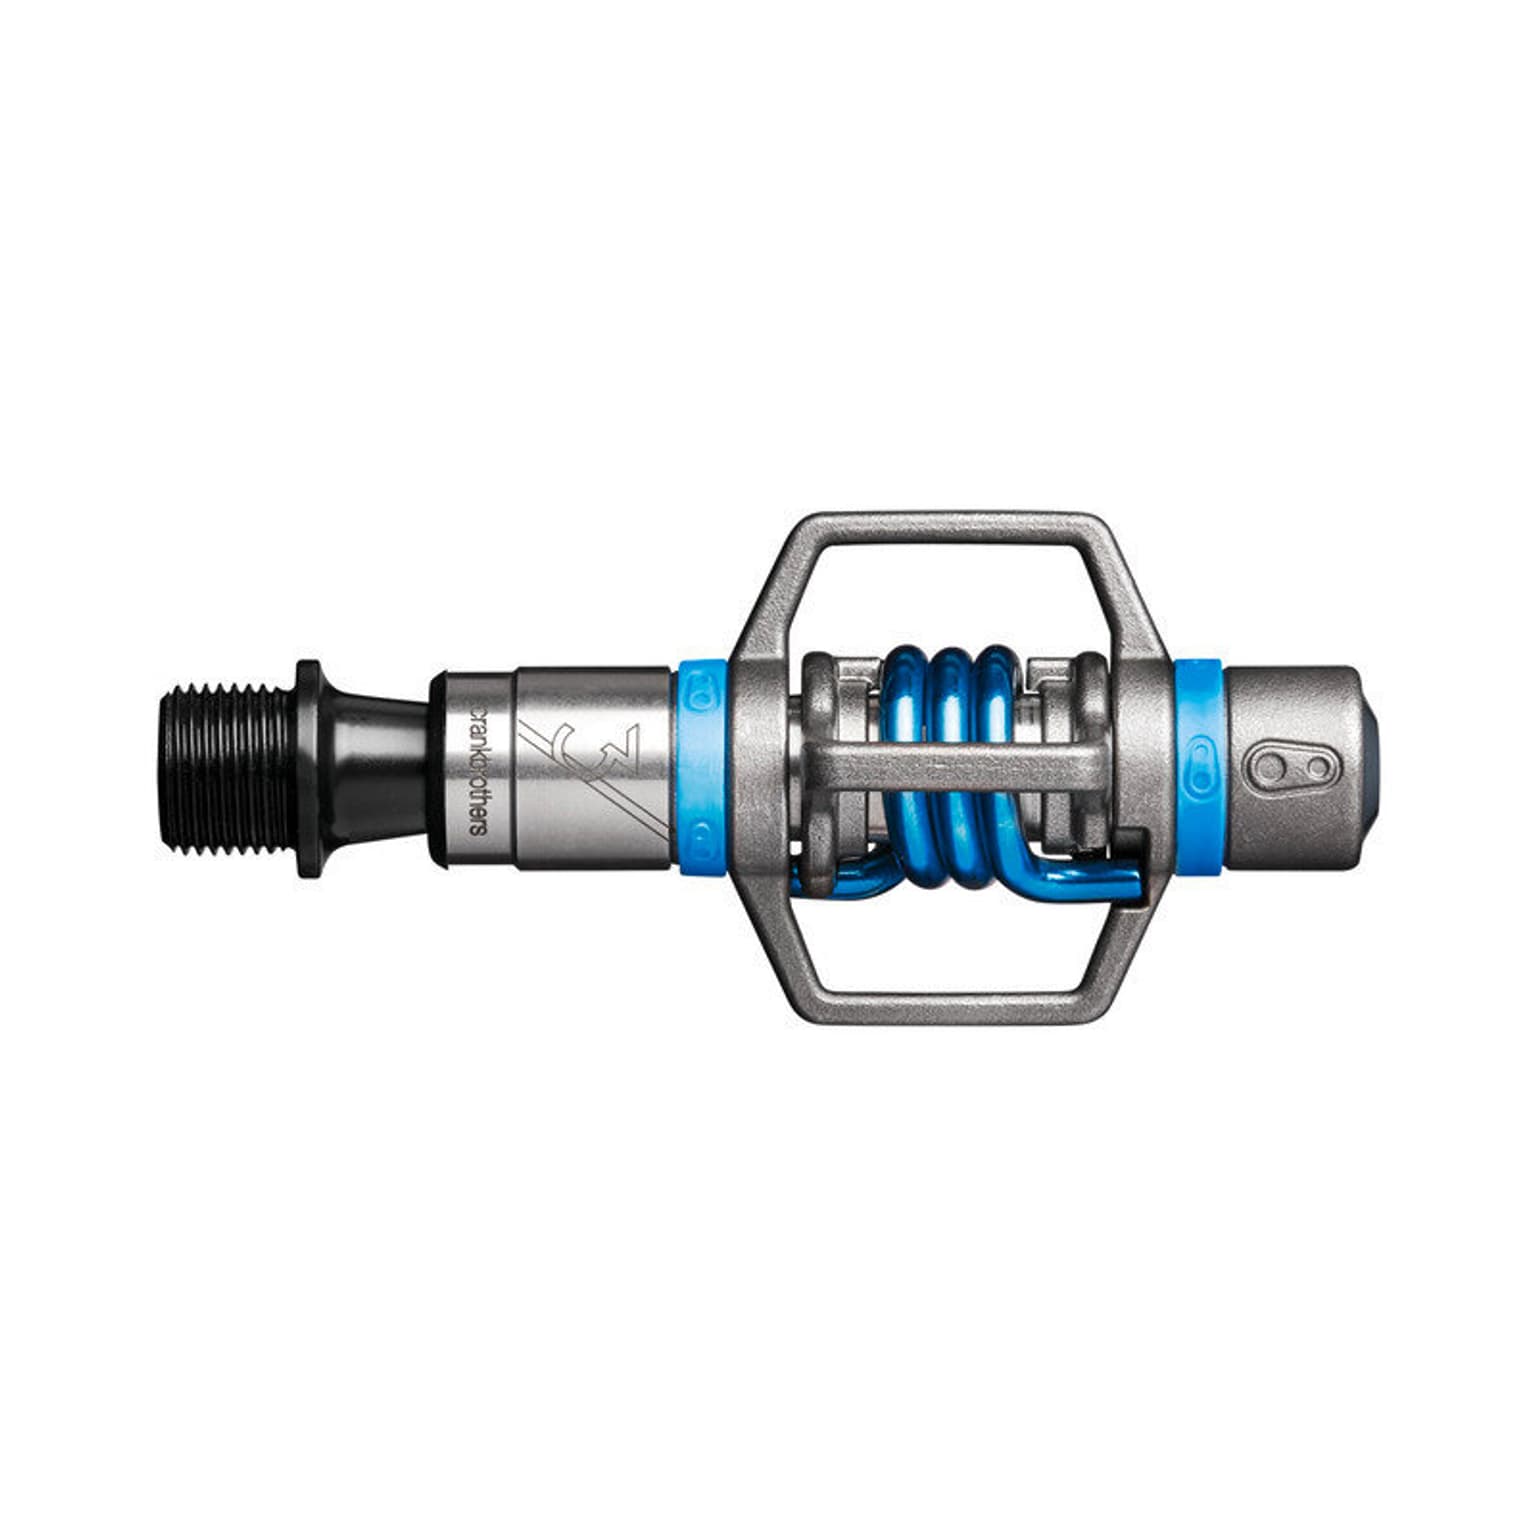 crankbrothers crankbrothers Pedale Egg Beater 3 Pedali 1